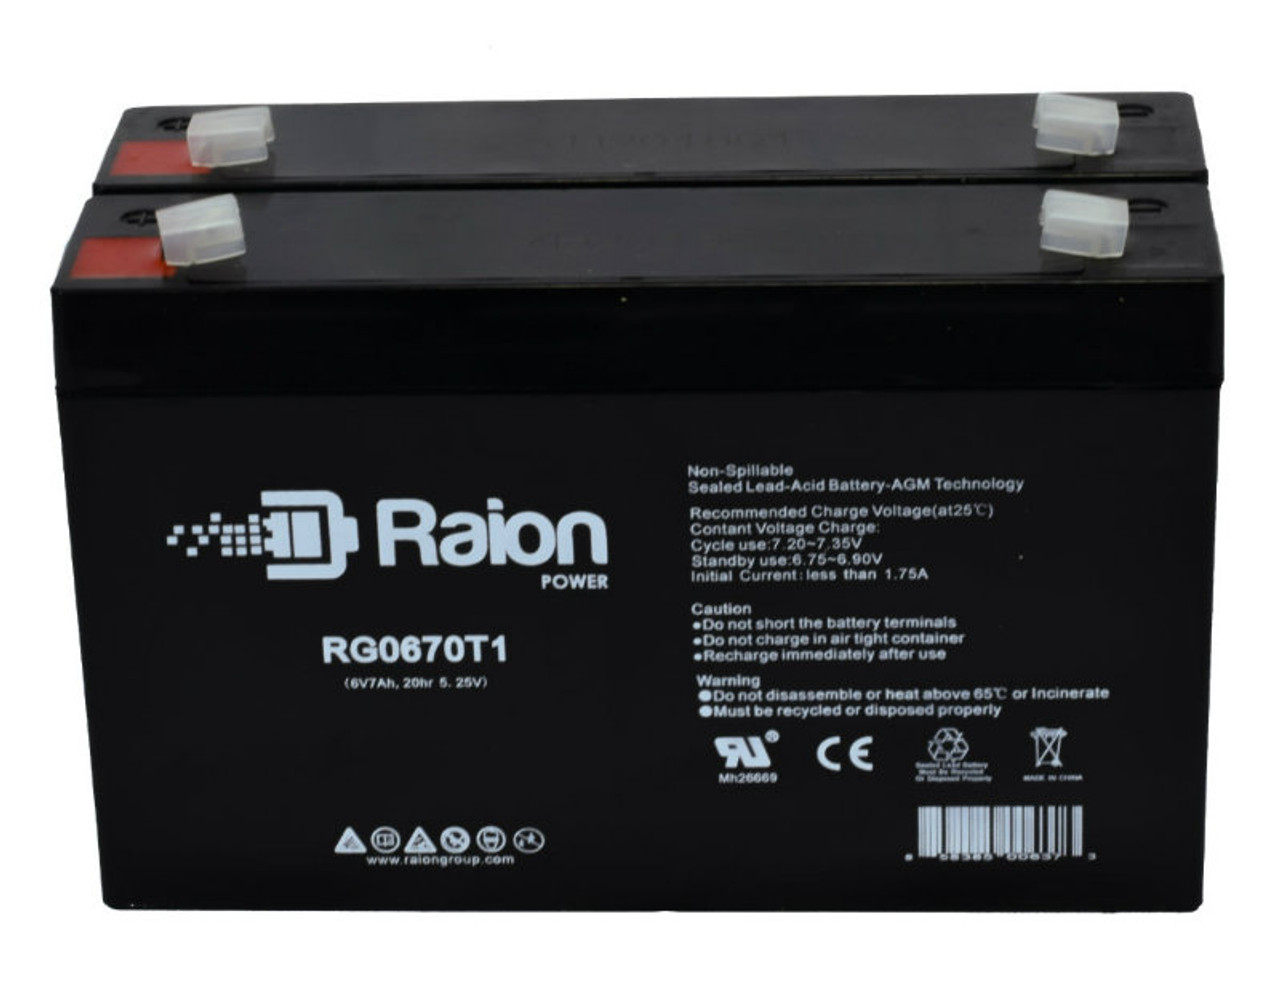 Raion Power RG0670T1 6V 7Ah Replacement Emergency Light Battery for GS Portalac PE6V6.5 - 2 Pack